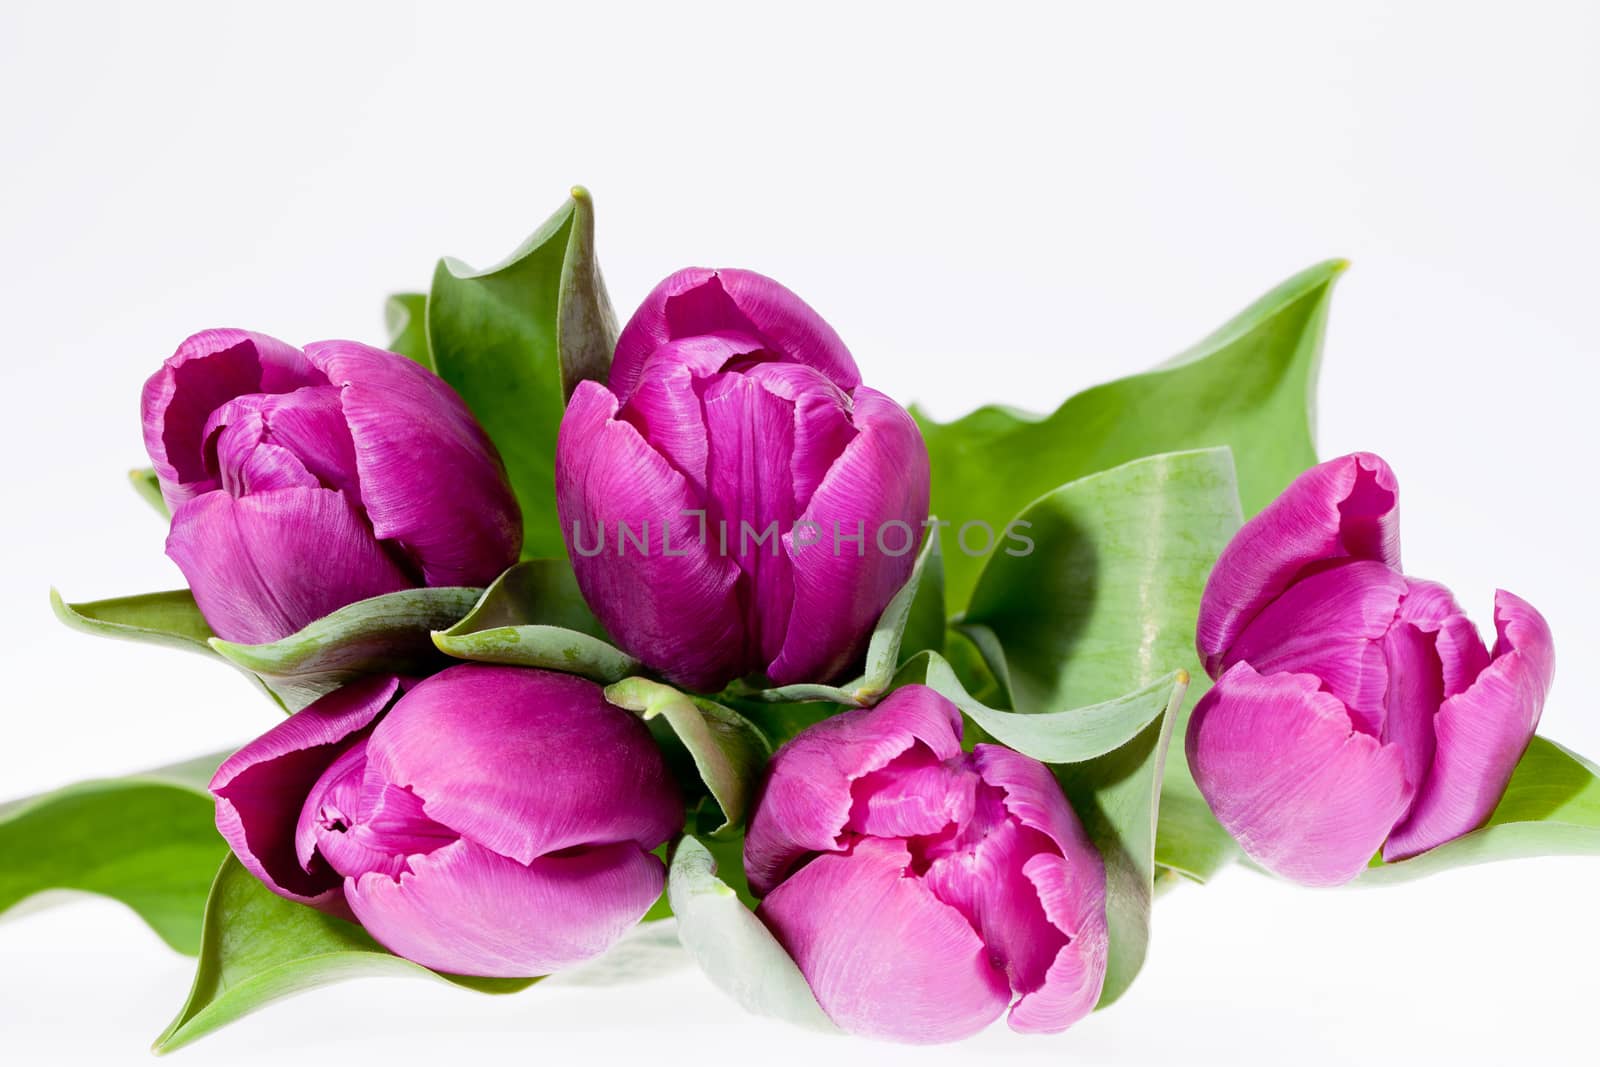 some violet spring flower tulips isolated on white background by mychadre77